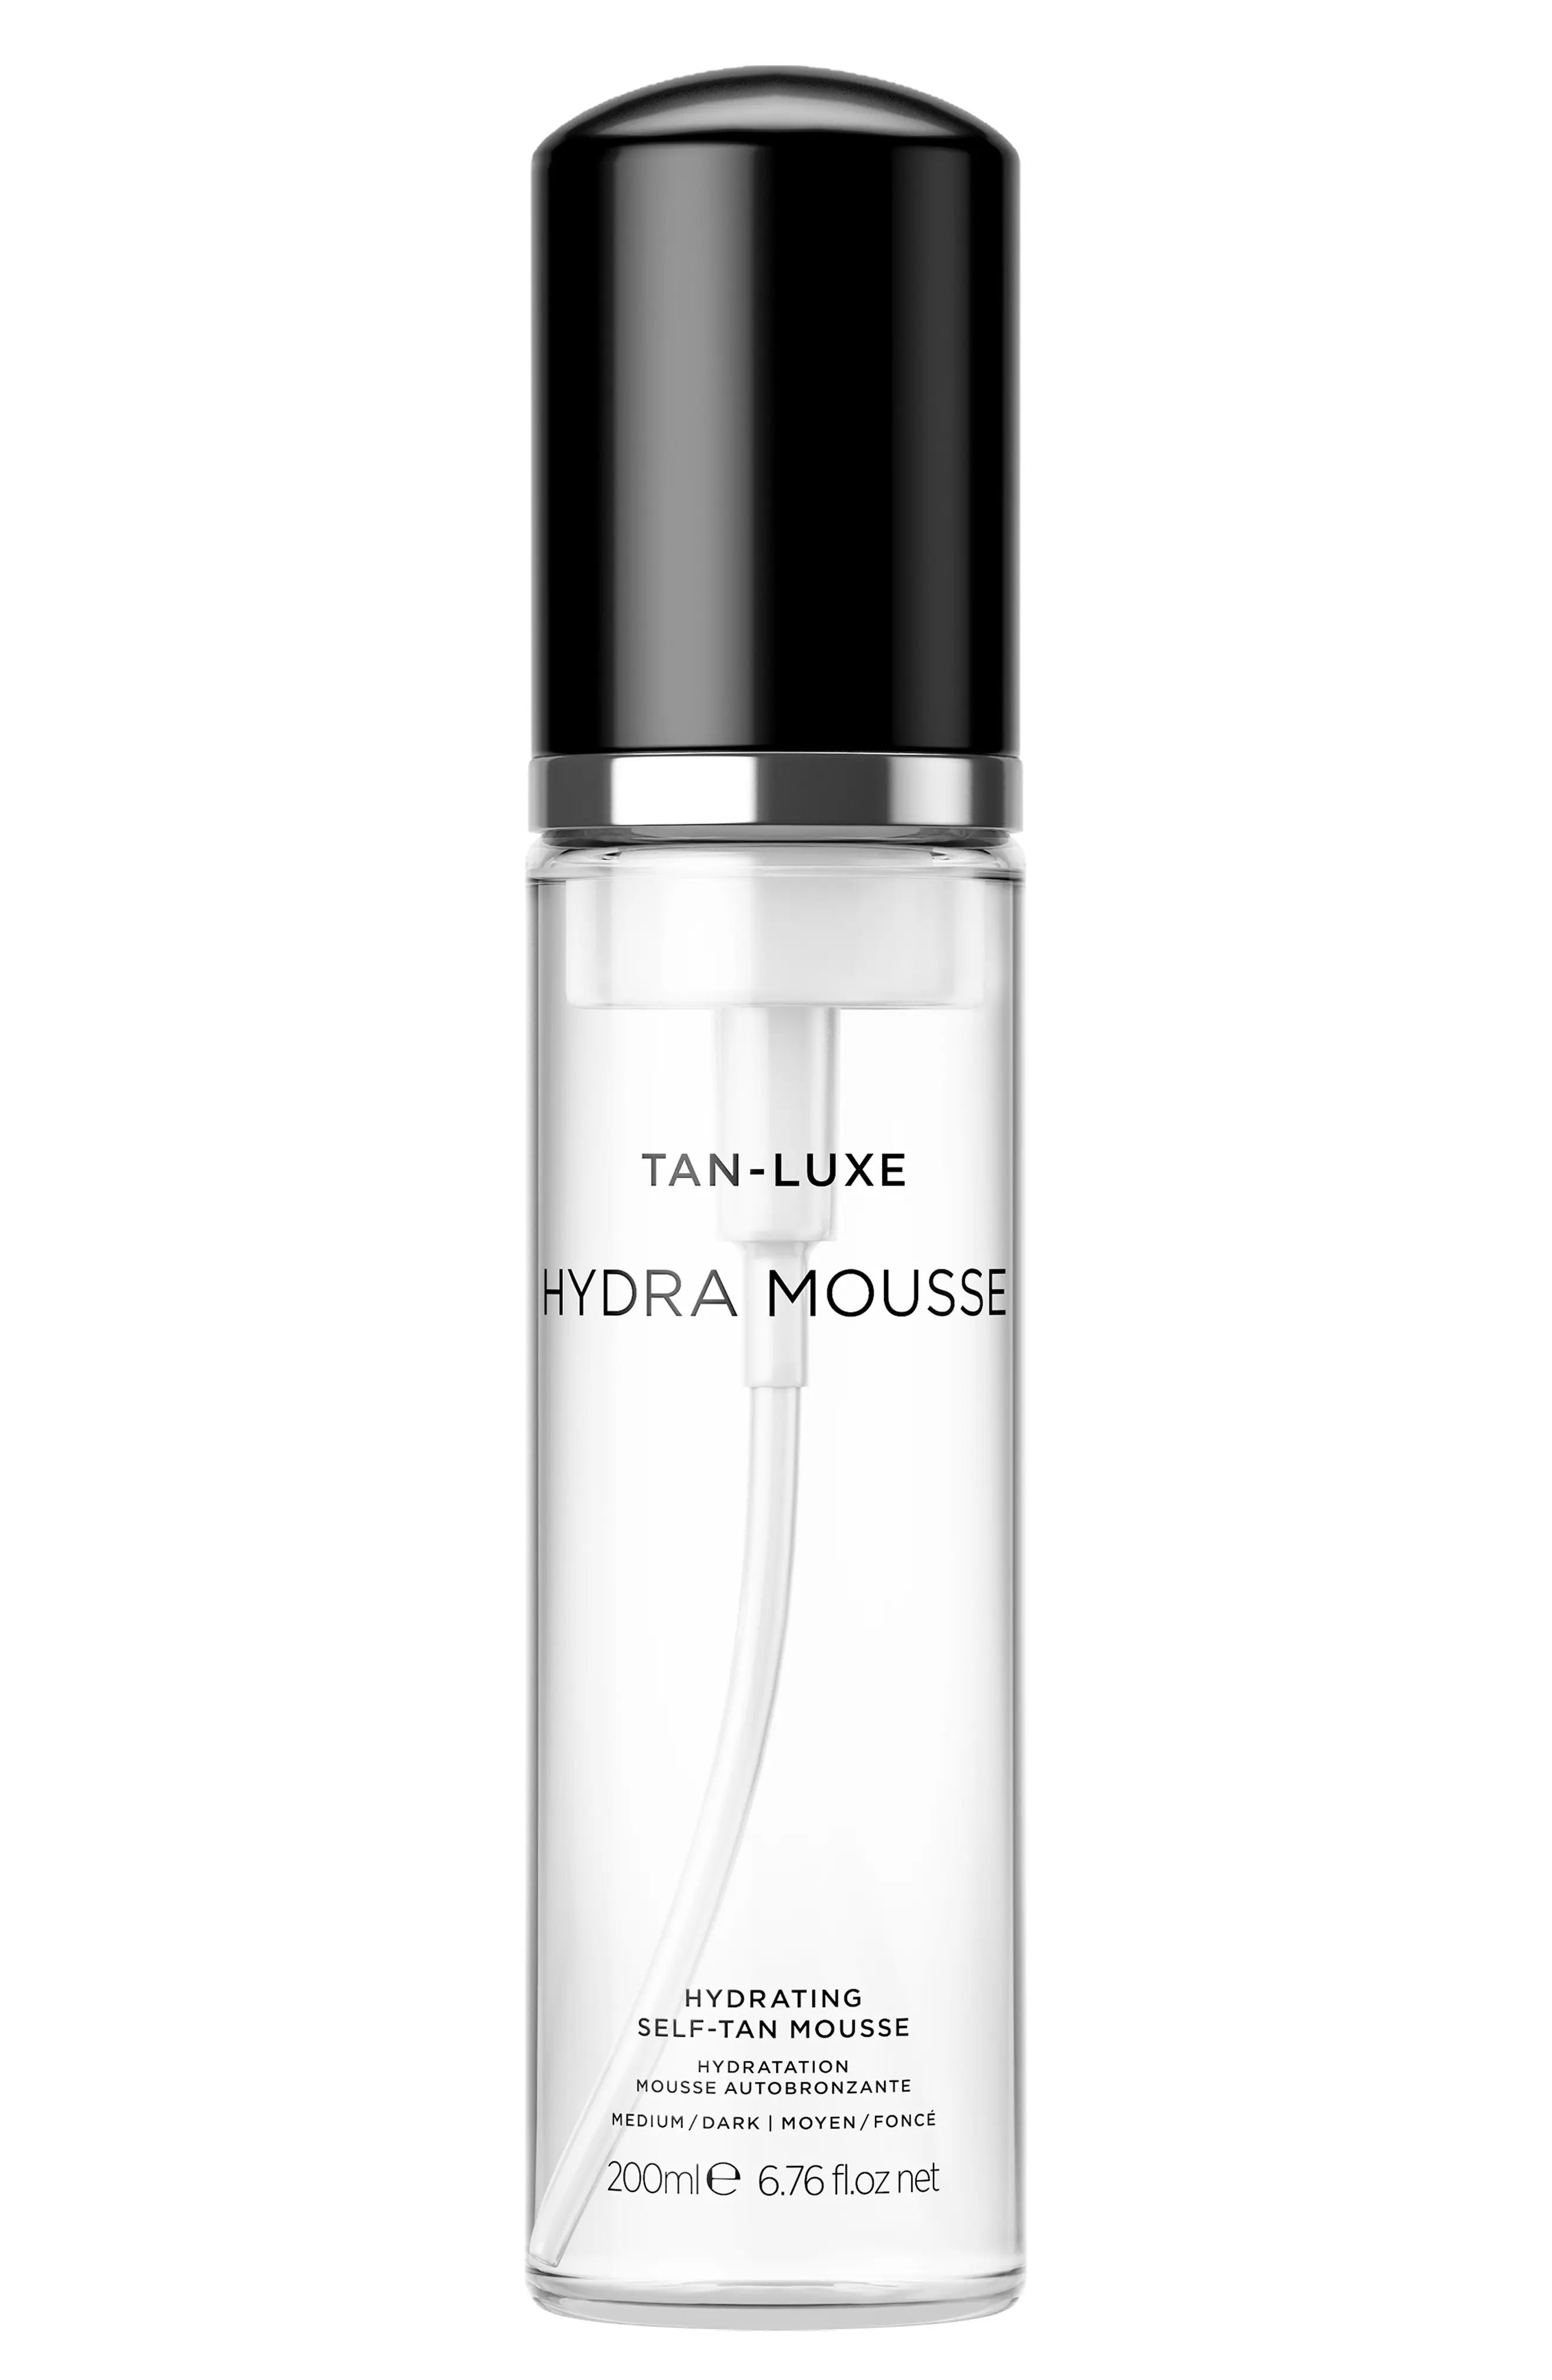 Tan-Luxe Hydra Mousse Hydrating Self-Tan Mousse | Nordstrom